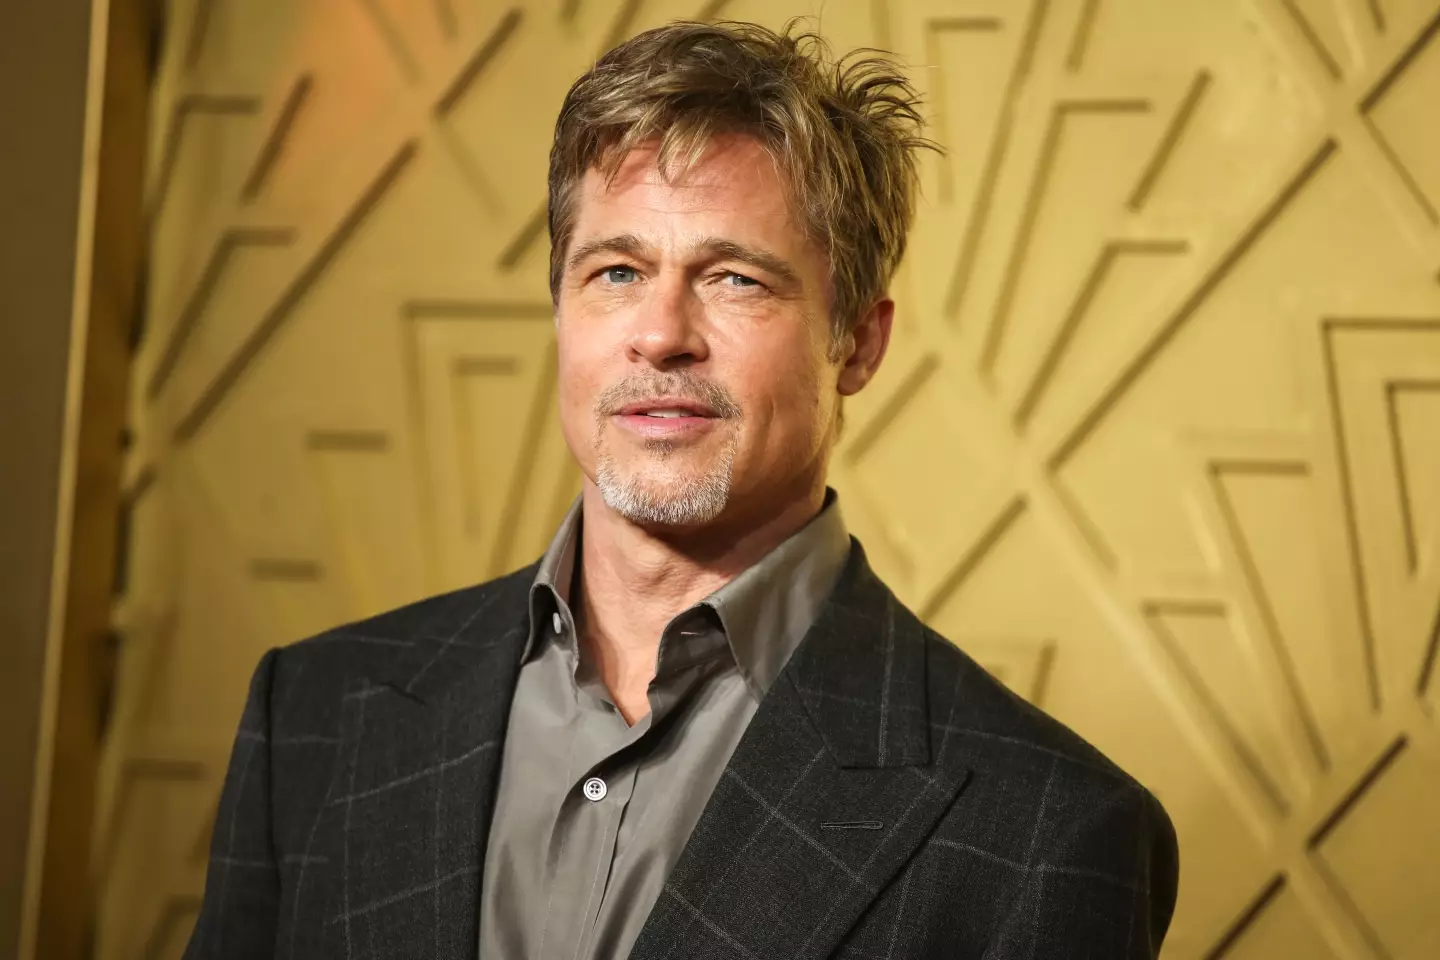 Brad Pitt first bought the Los Angeles property in 1994.